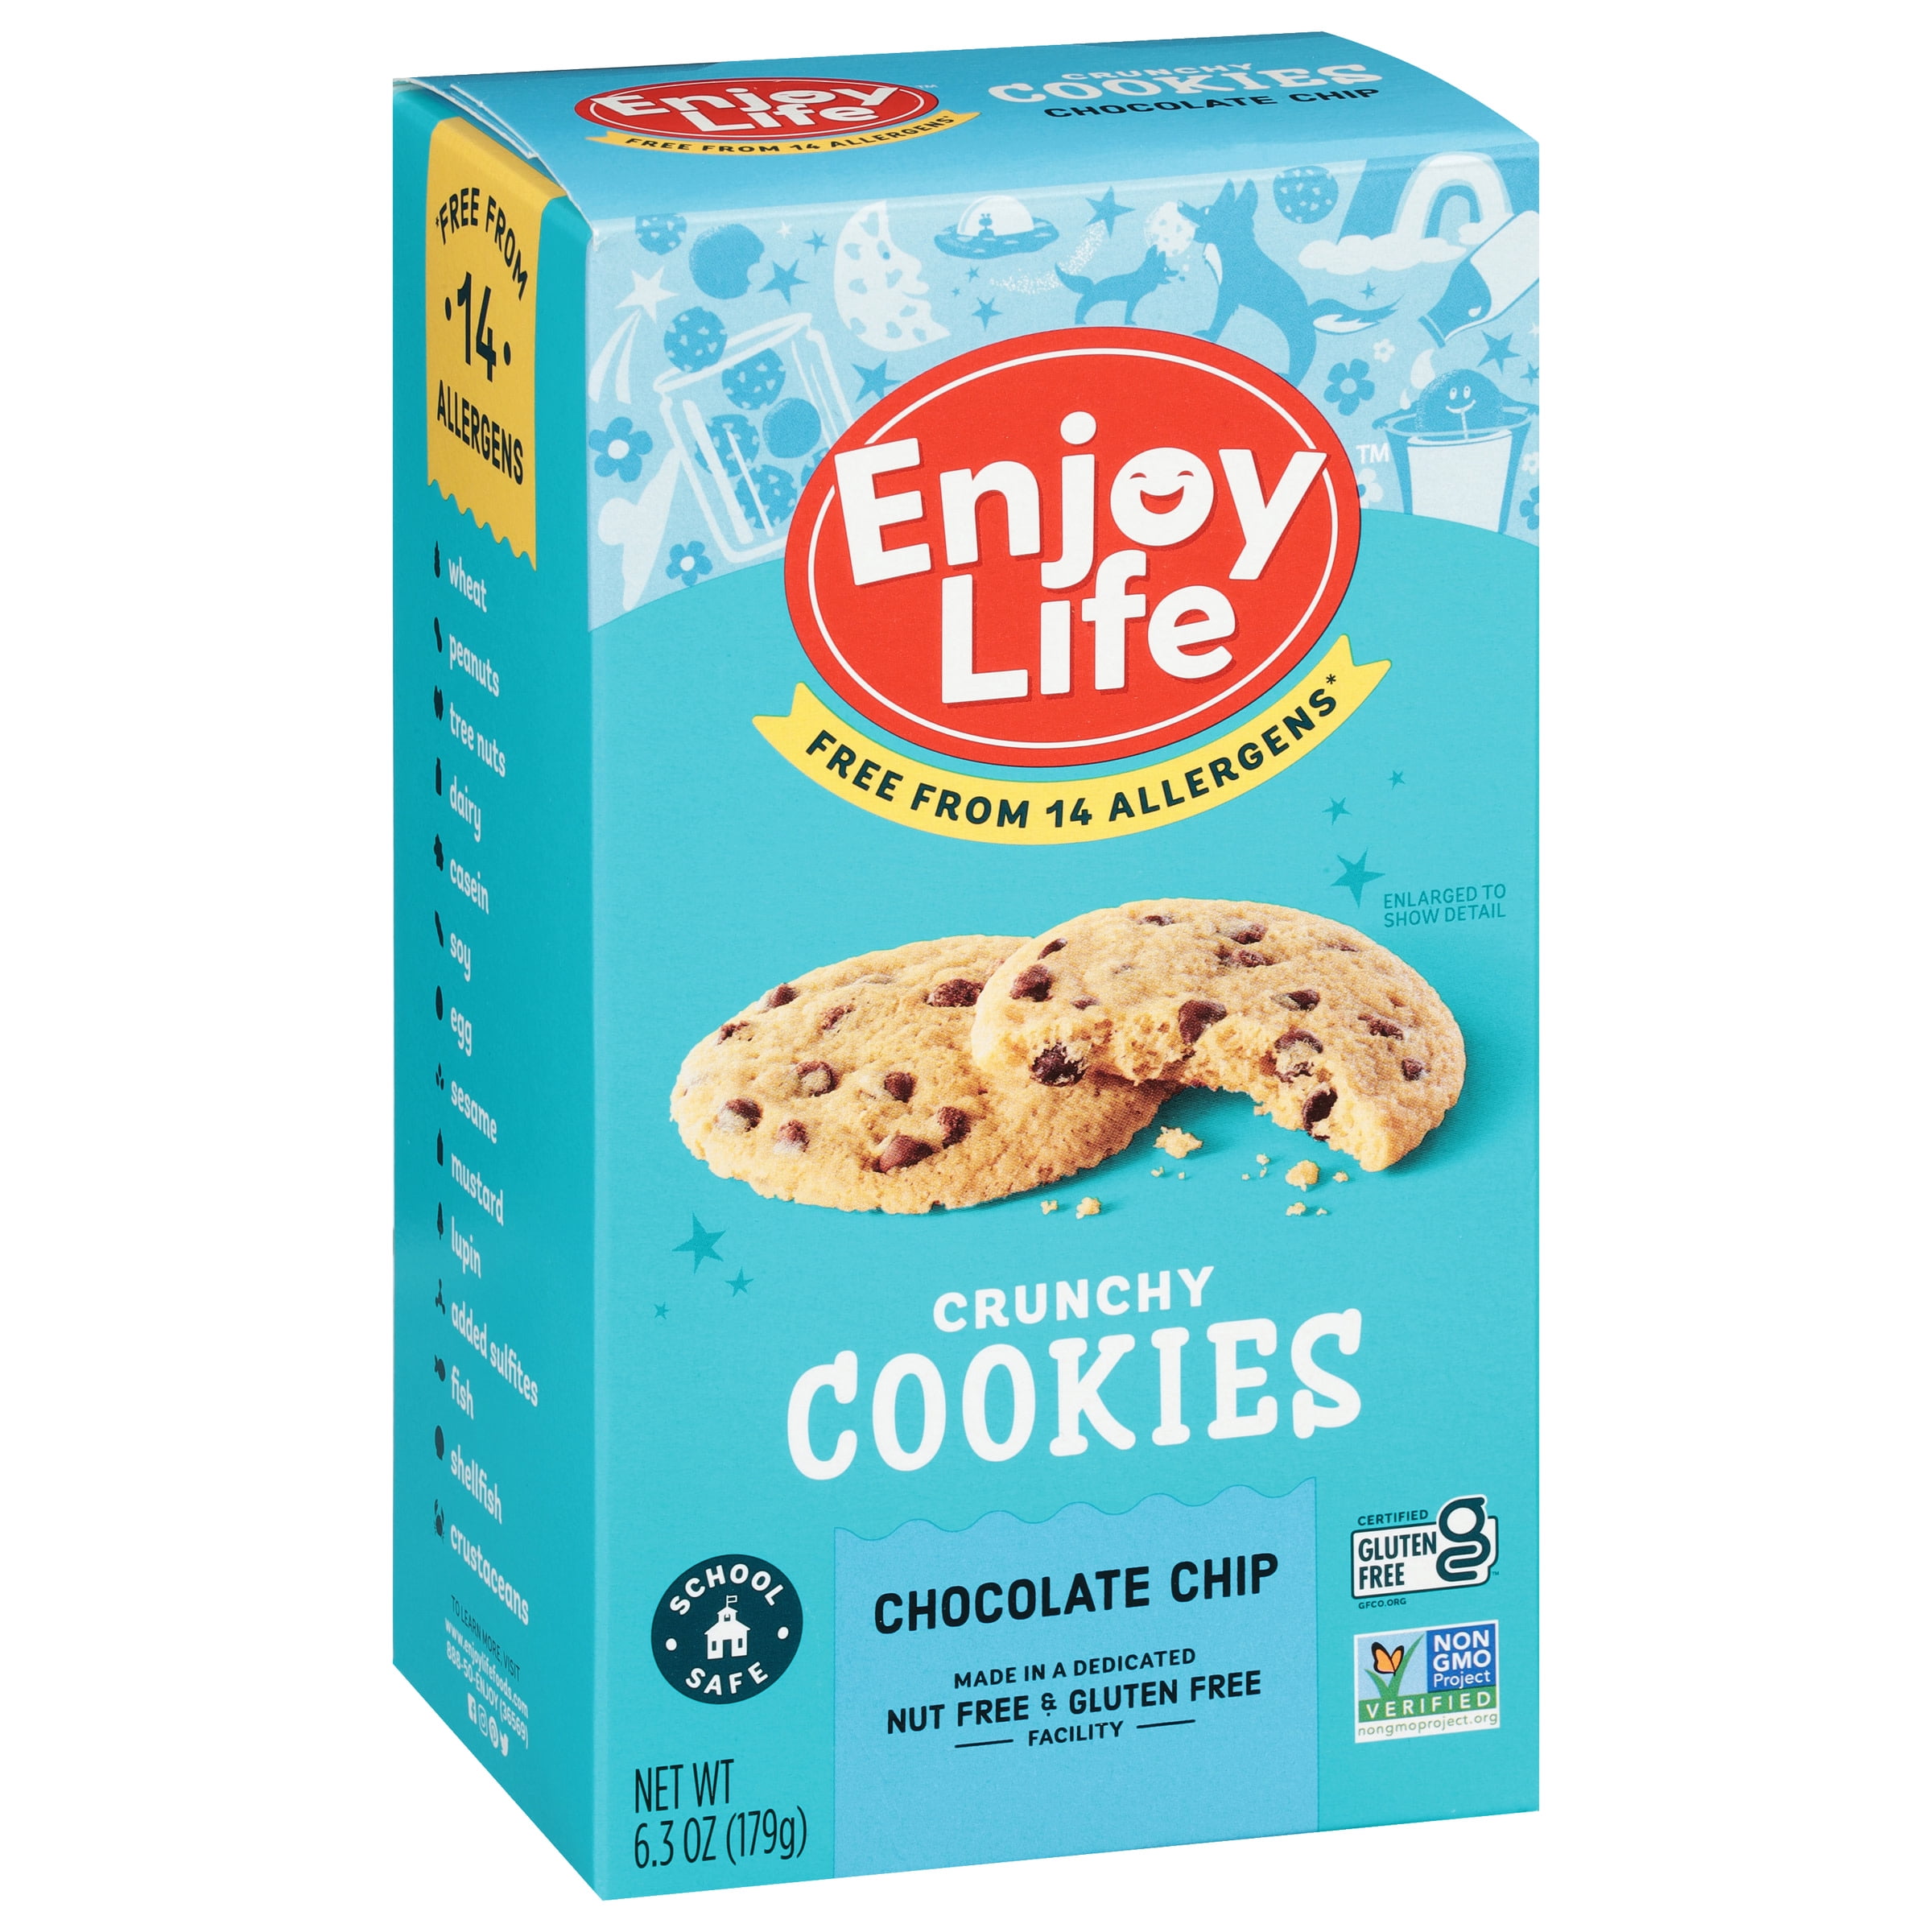 Crunchy Chocolate Chip Cookies 1.09 oz (Pack of 6), SnackMagic